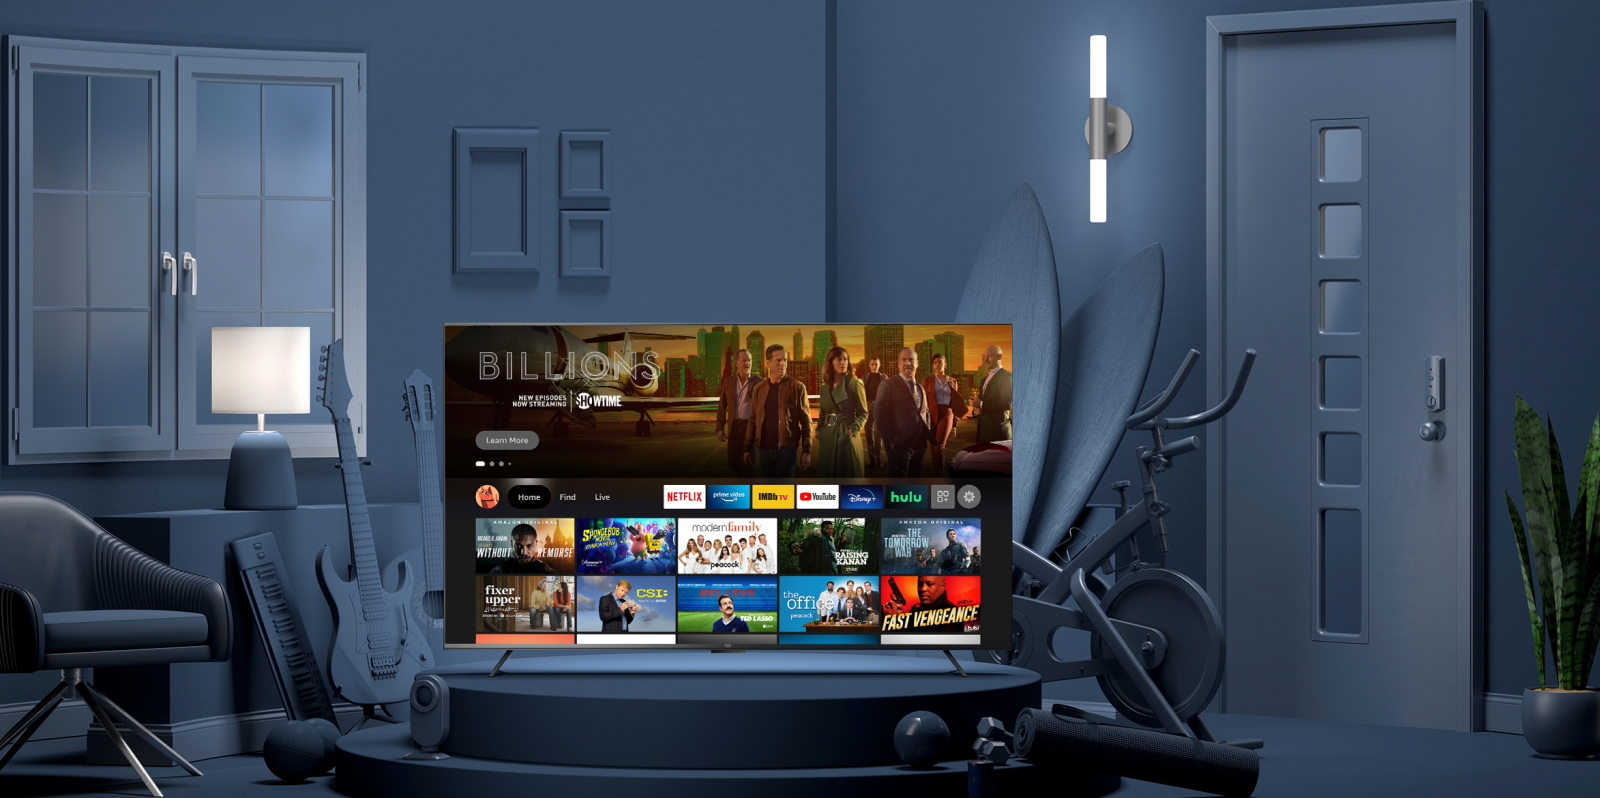 Limited time deal will get you up to 40% savings on Amazon’s best Fire TV products